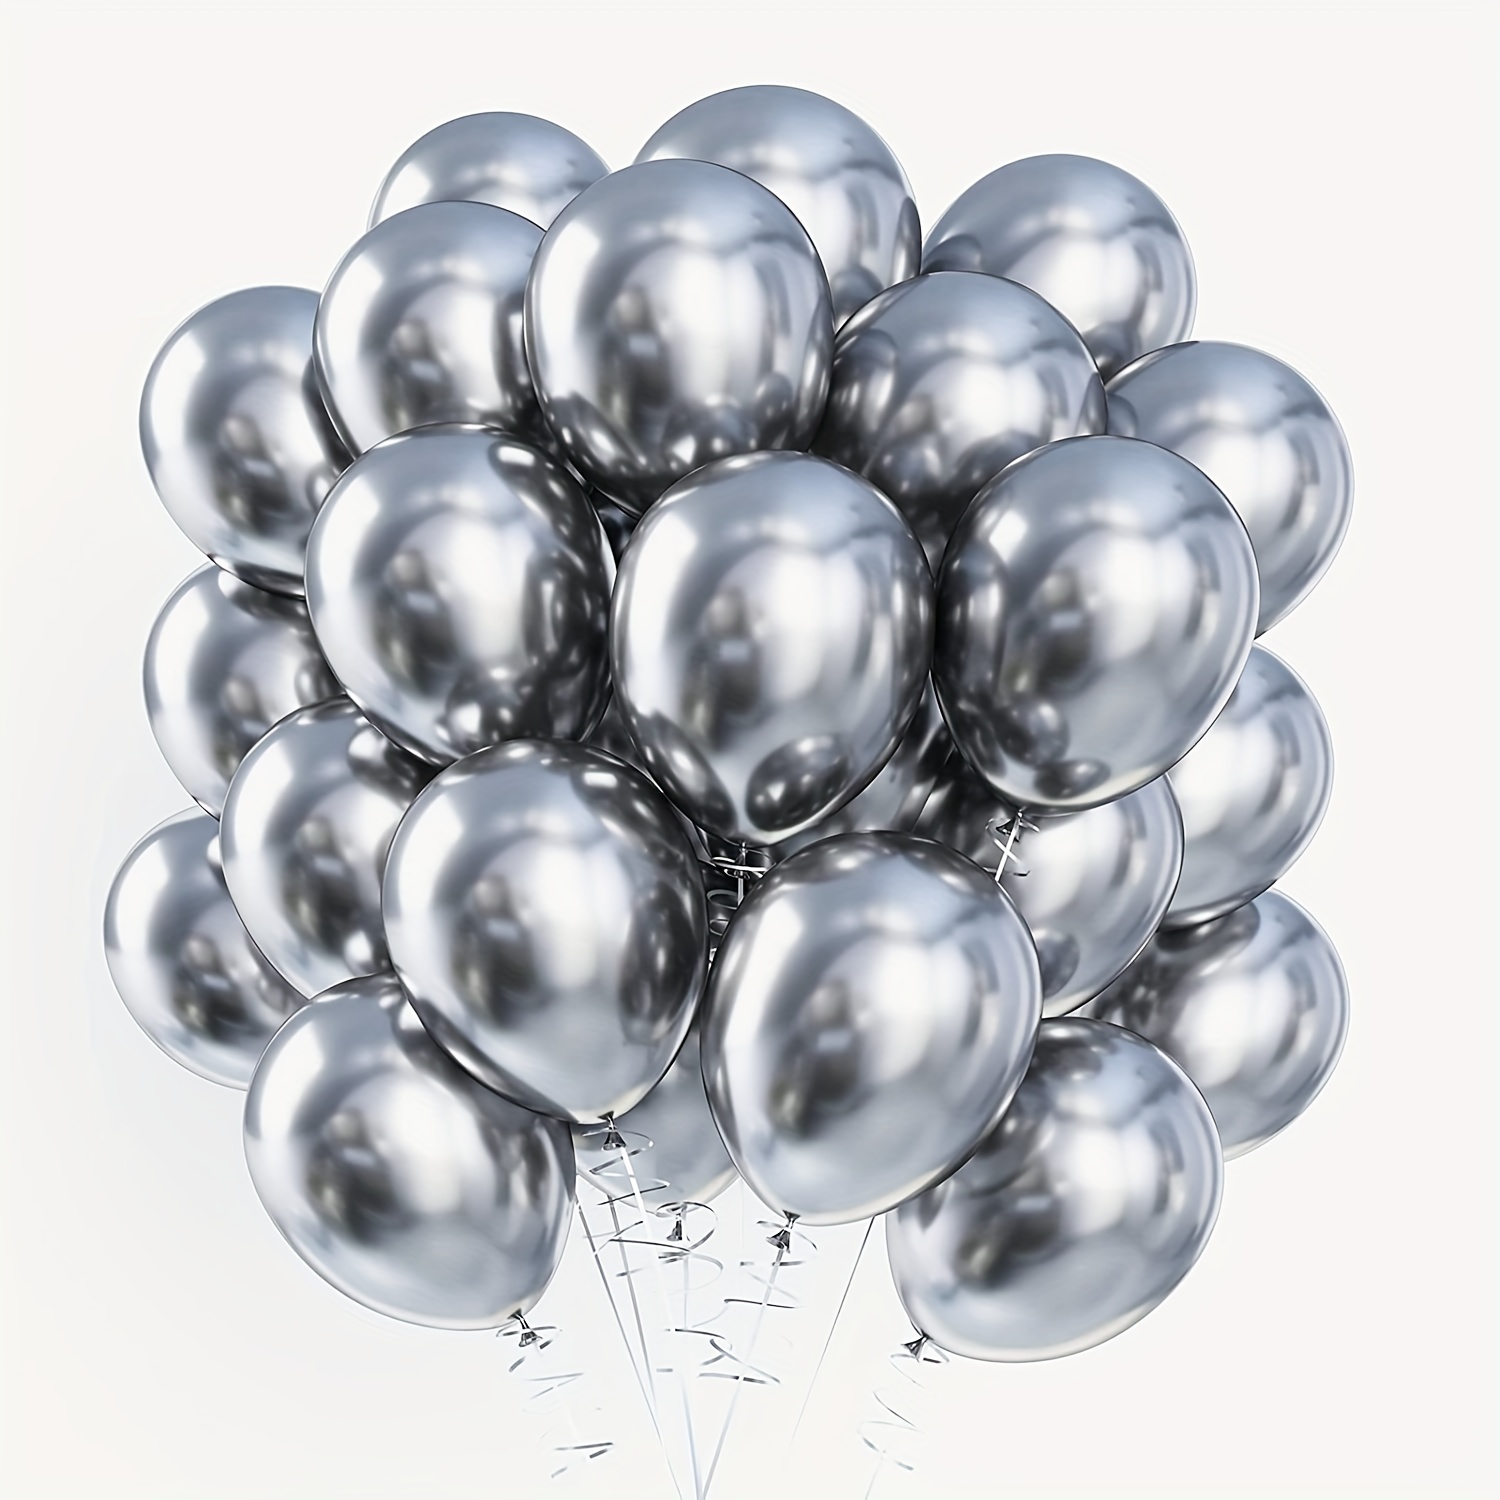 

25pcs, Metallic Silver Balloons - 10 Inch Latex Balloons With Ribbon For Birthday, Wedding, Baby Shower, Graduation, Anniversary, Party Decorations And Graduation Ceremony Backdrop